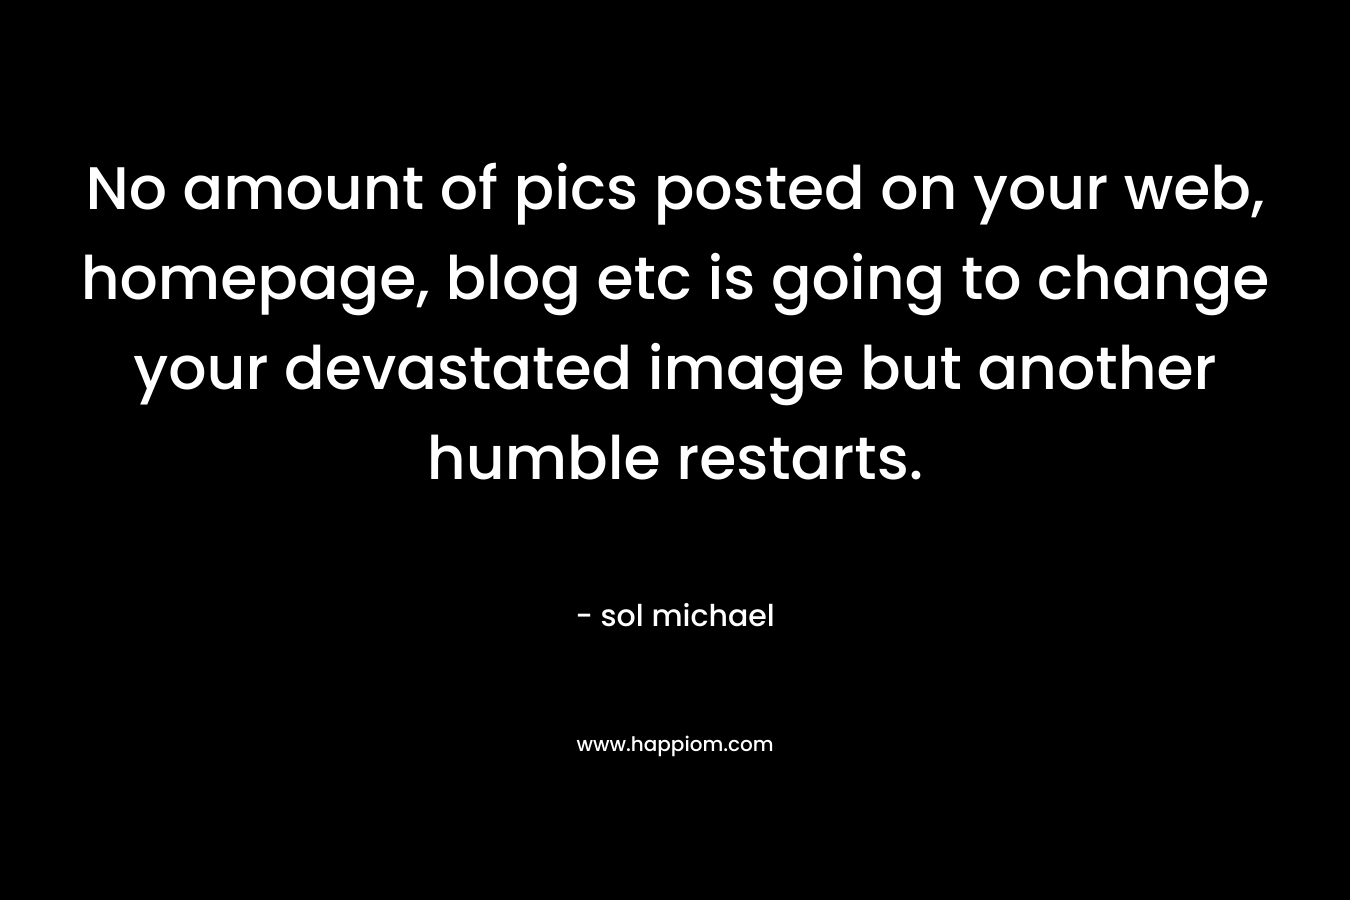 No amount of pics posted on your web, homepage, blog etc is going to change your devastated image but another humble restarts. – sol michael